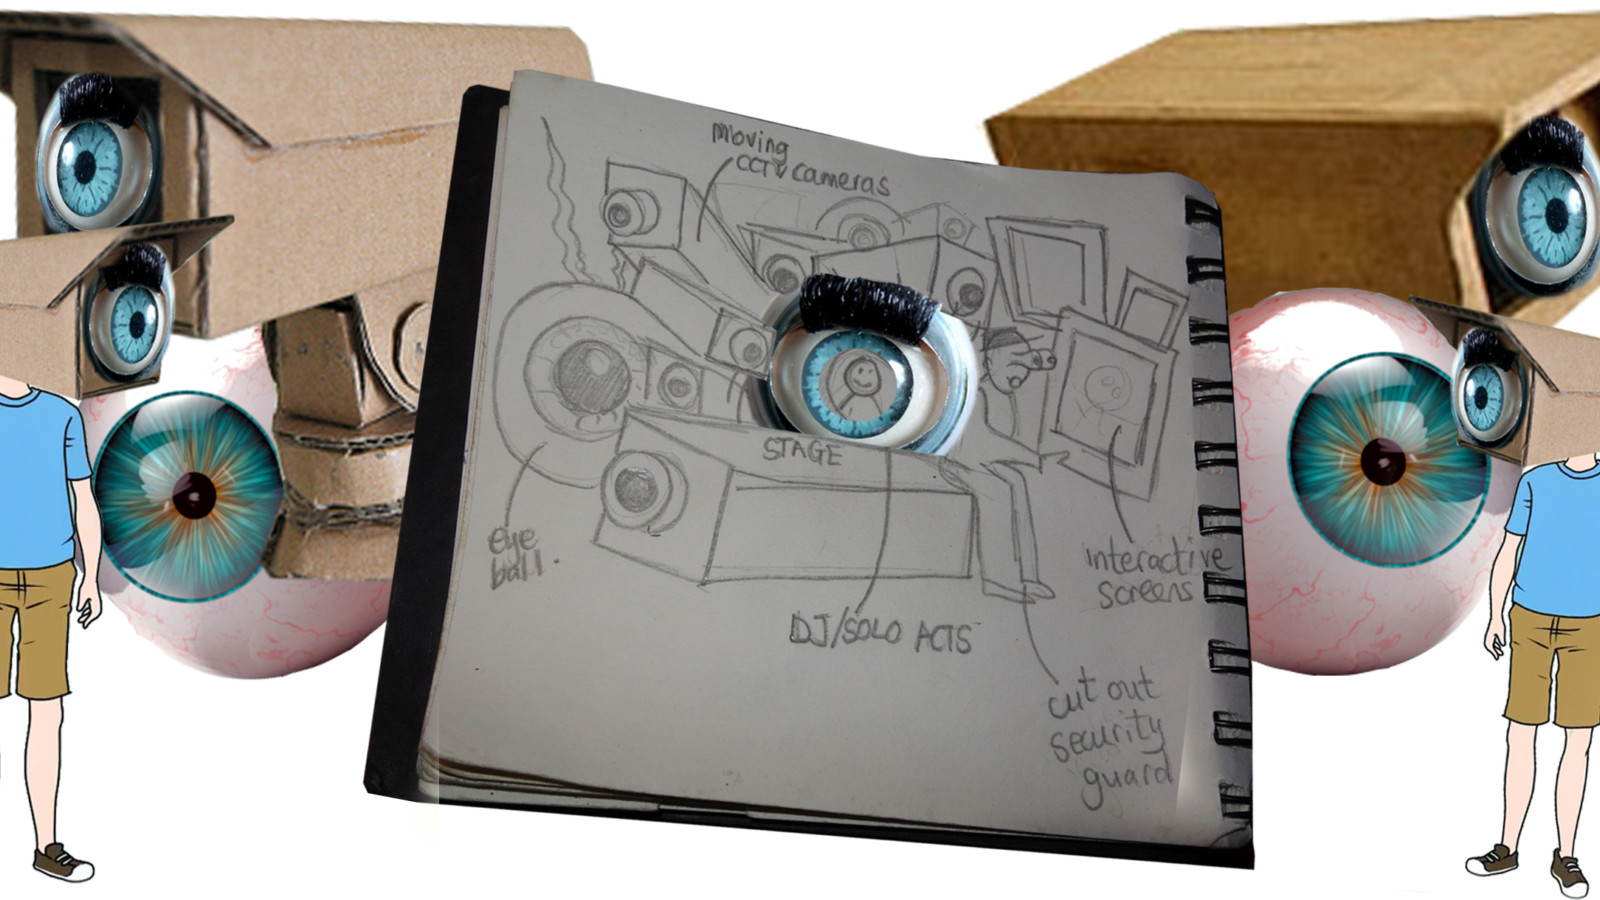 A collage, showing a sketch book in the middle with drawing of CCTV cameras and eye balls. Behind the sketch book are two cardboard CCTV Cameras with eyeballs in place of lenses. More large eyeballs are dotted around and two drawings of a person with cardboard CCTV cameras in place of their heads.